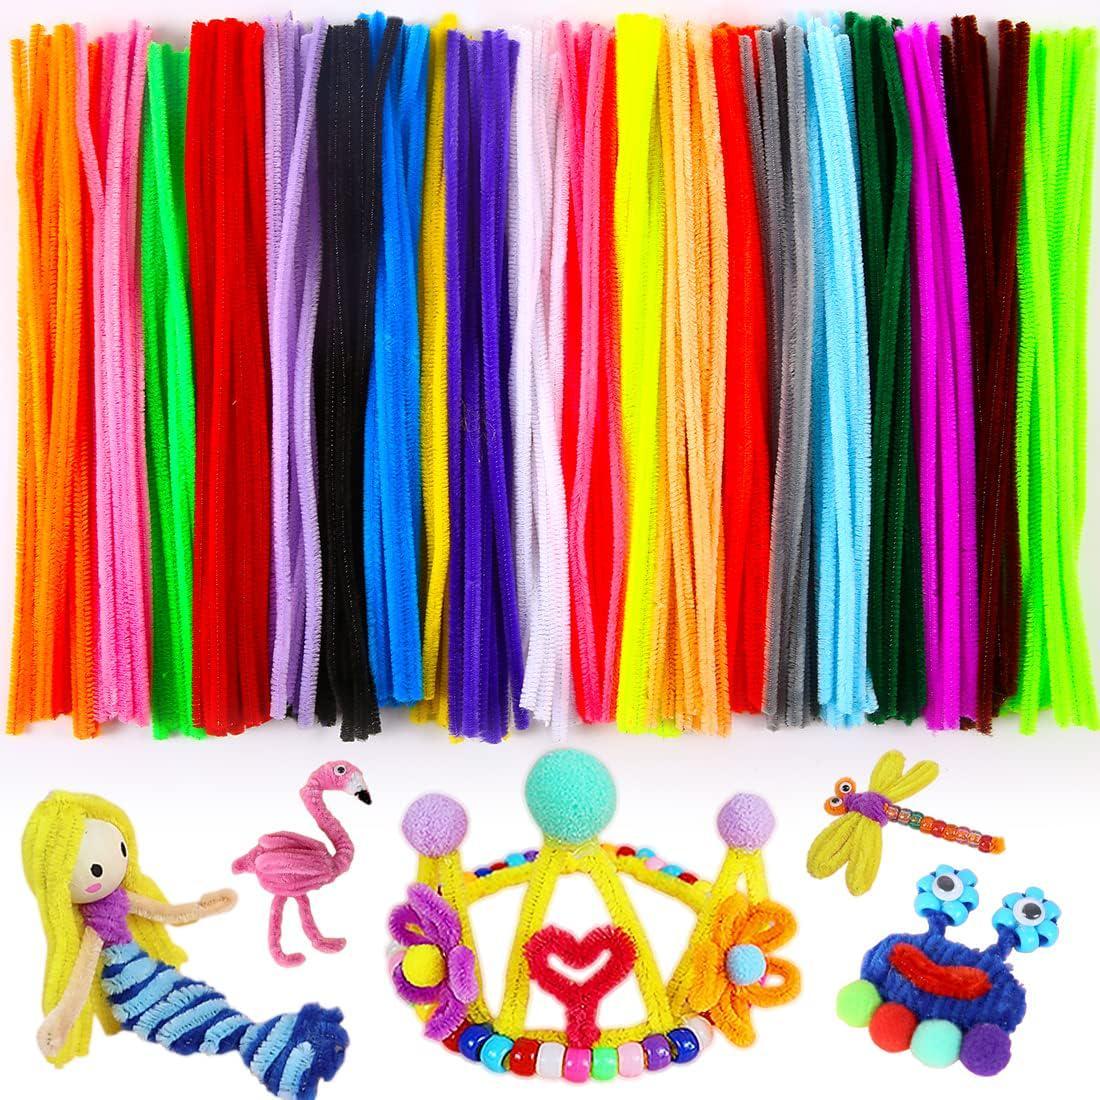 Pipe Cleaners for Crafts (200pcs in Gray), 12 inch Long Pipe Cleaners, Pink  Pipe Cleaners.